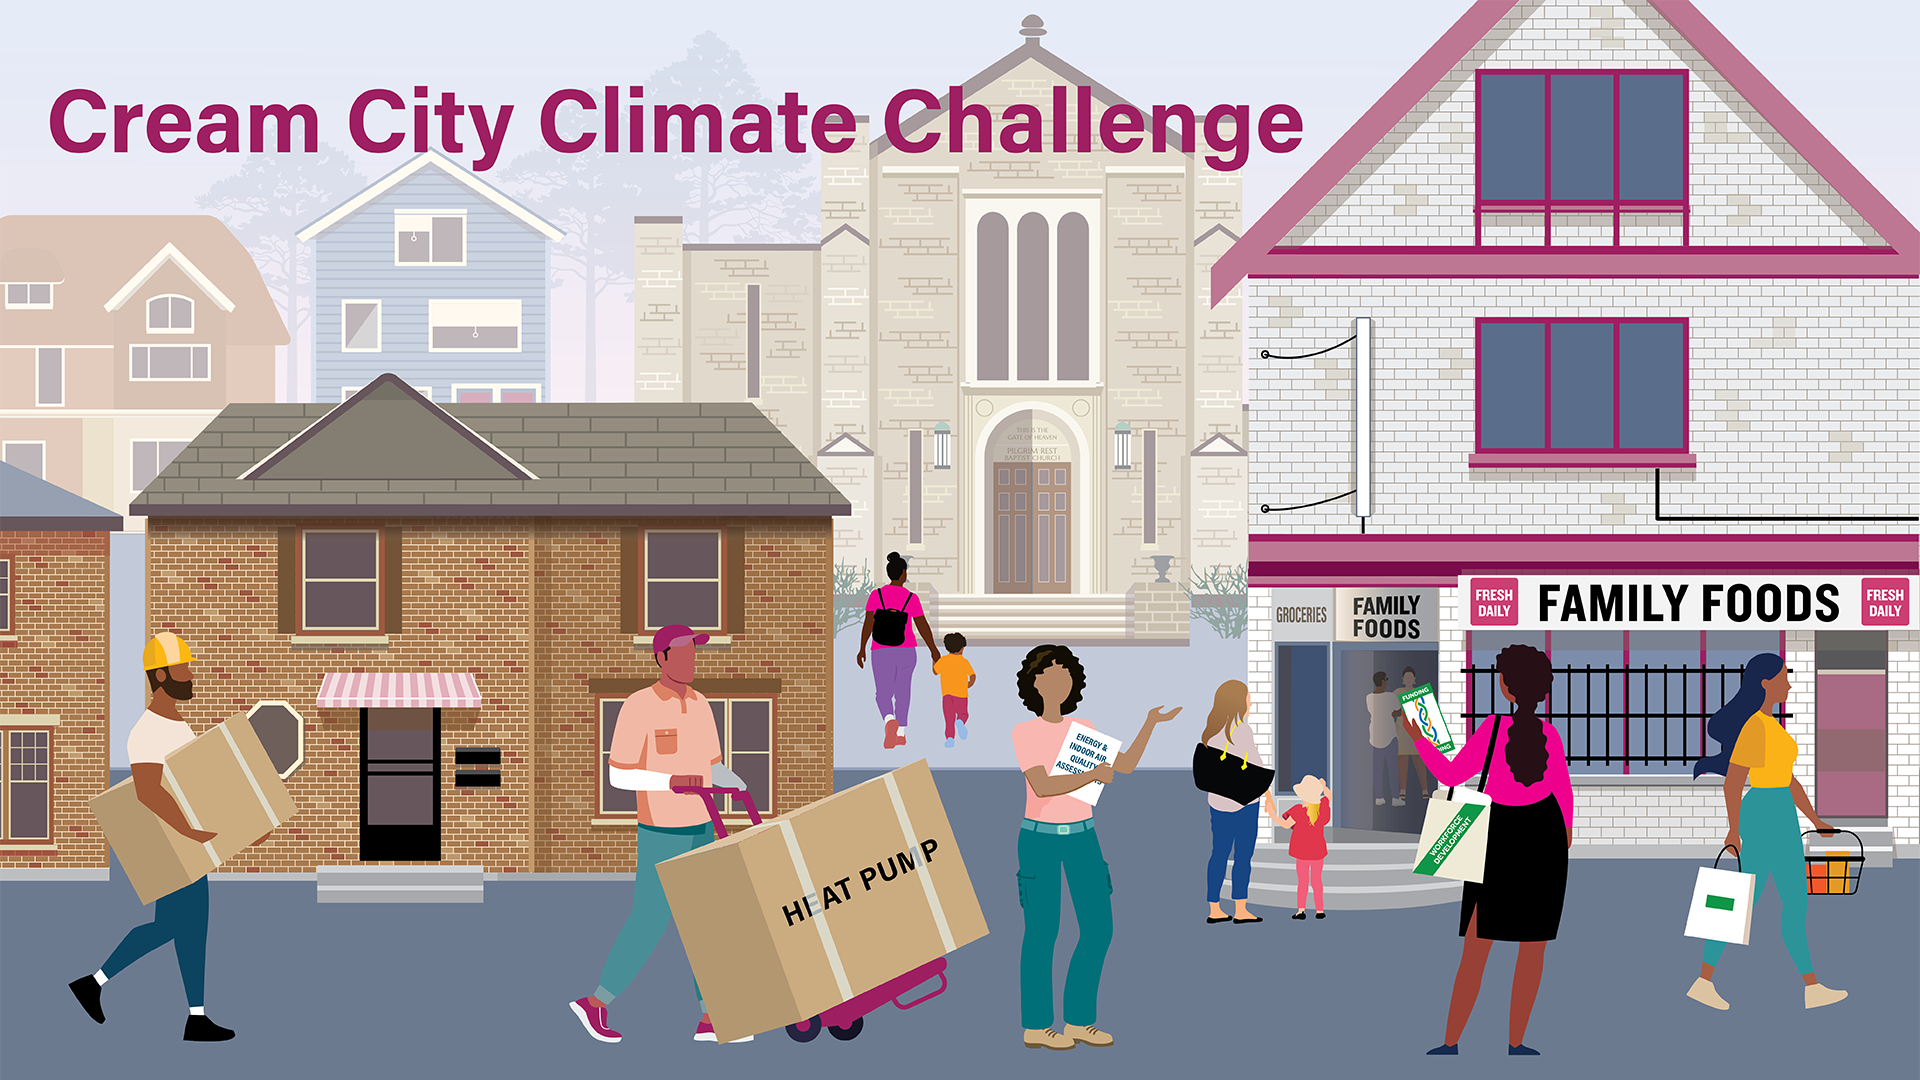 Illustration for the Cream City Climate Challenge